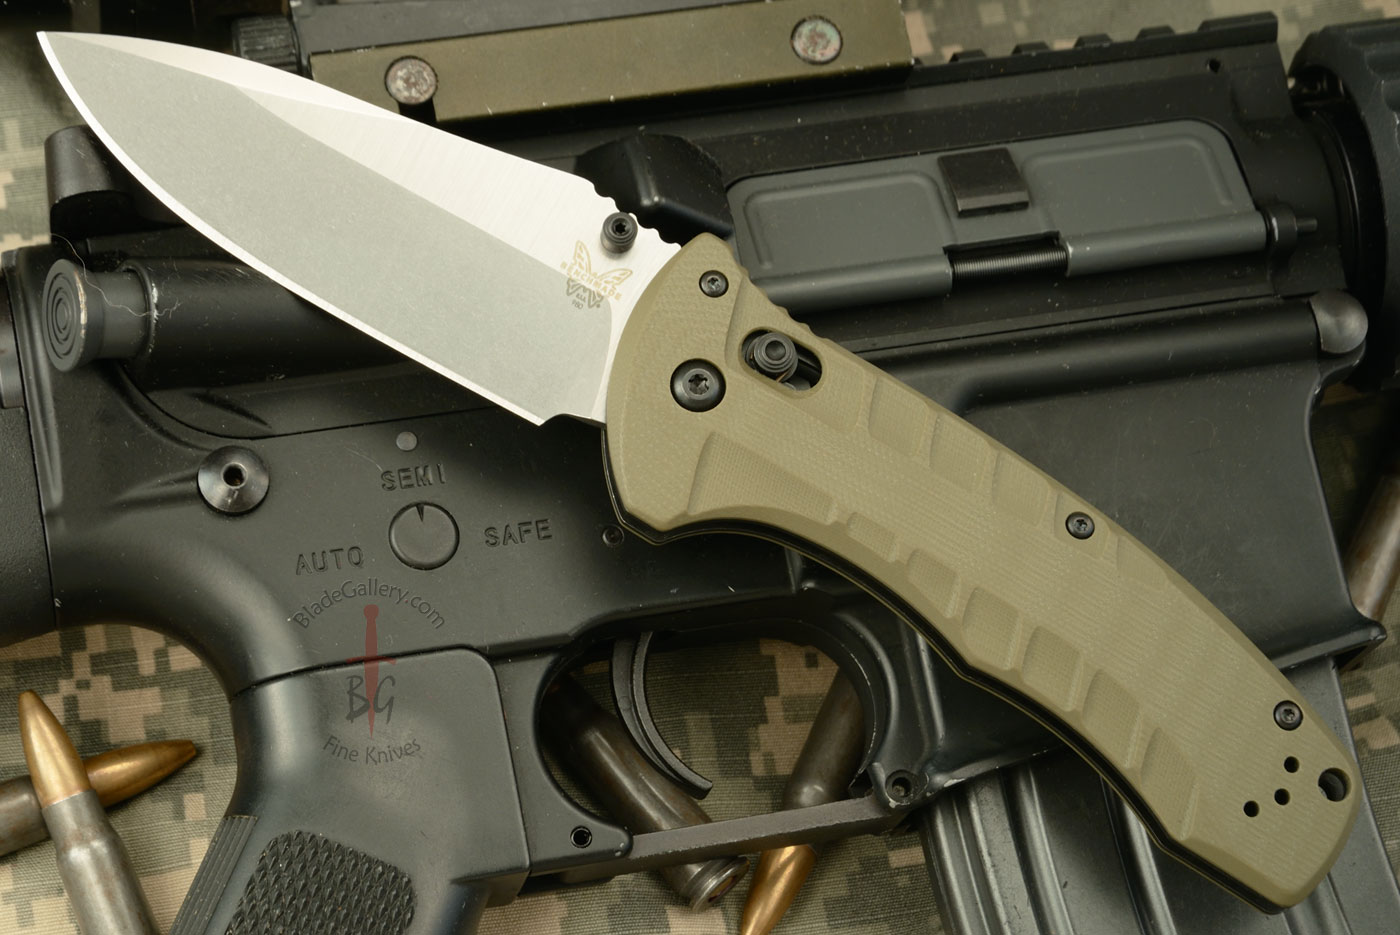 Turret (980) AXIS Lock Folder with OD Green G10